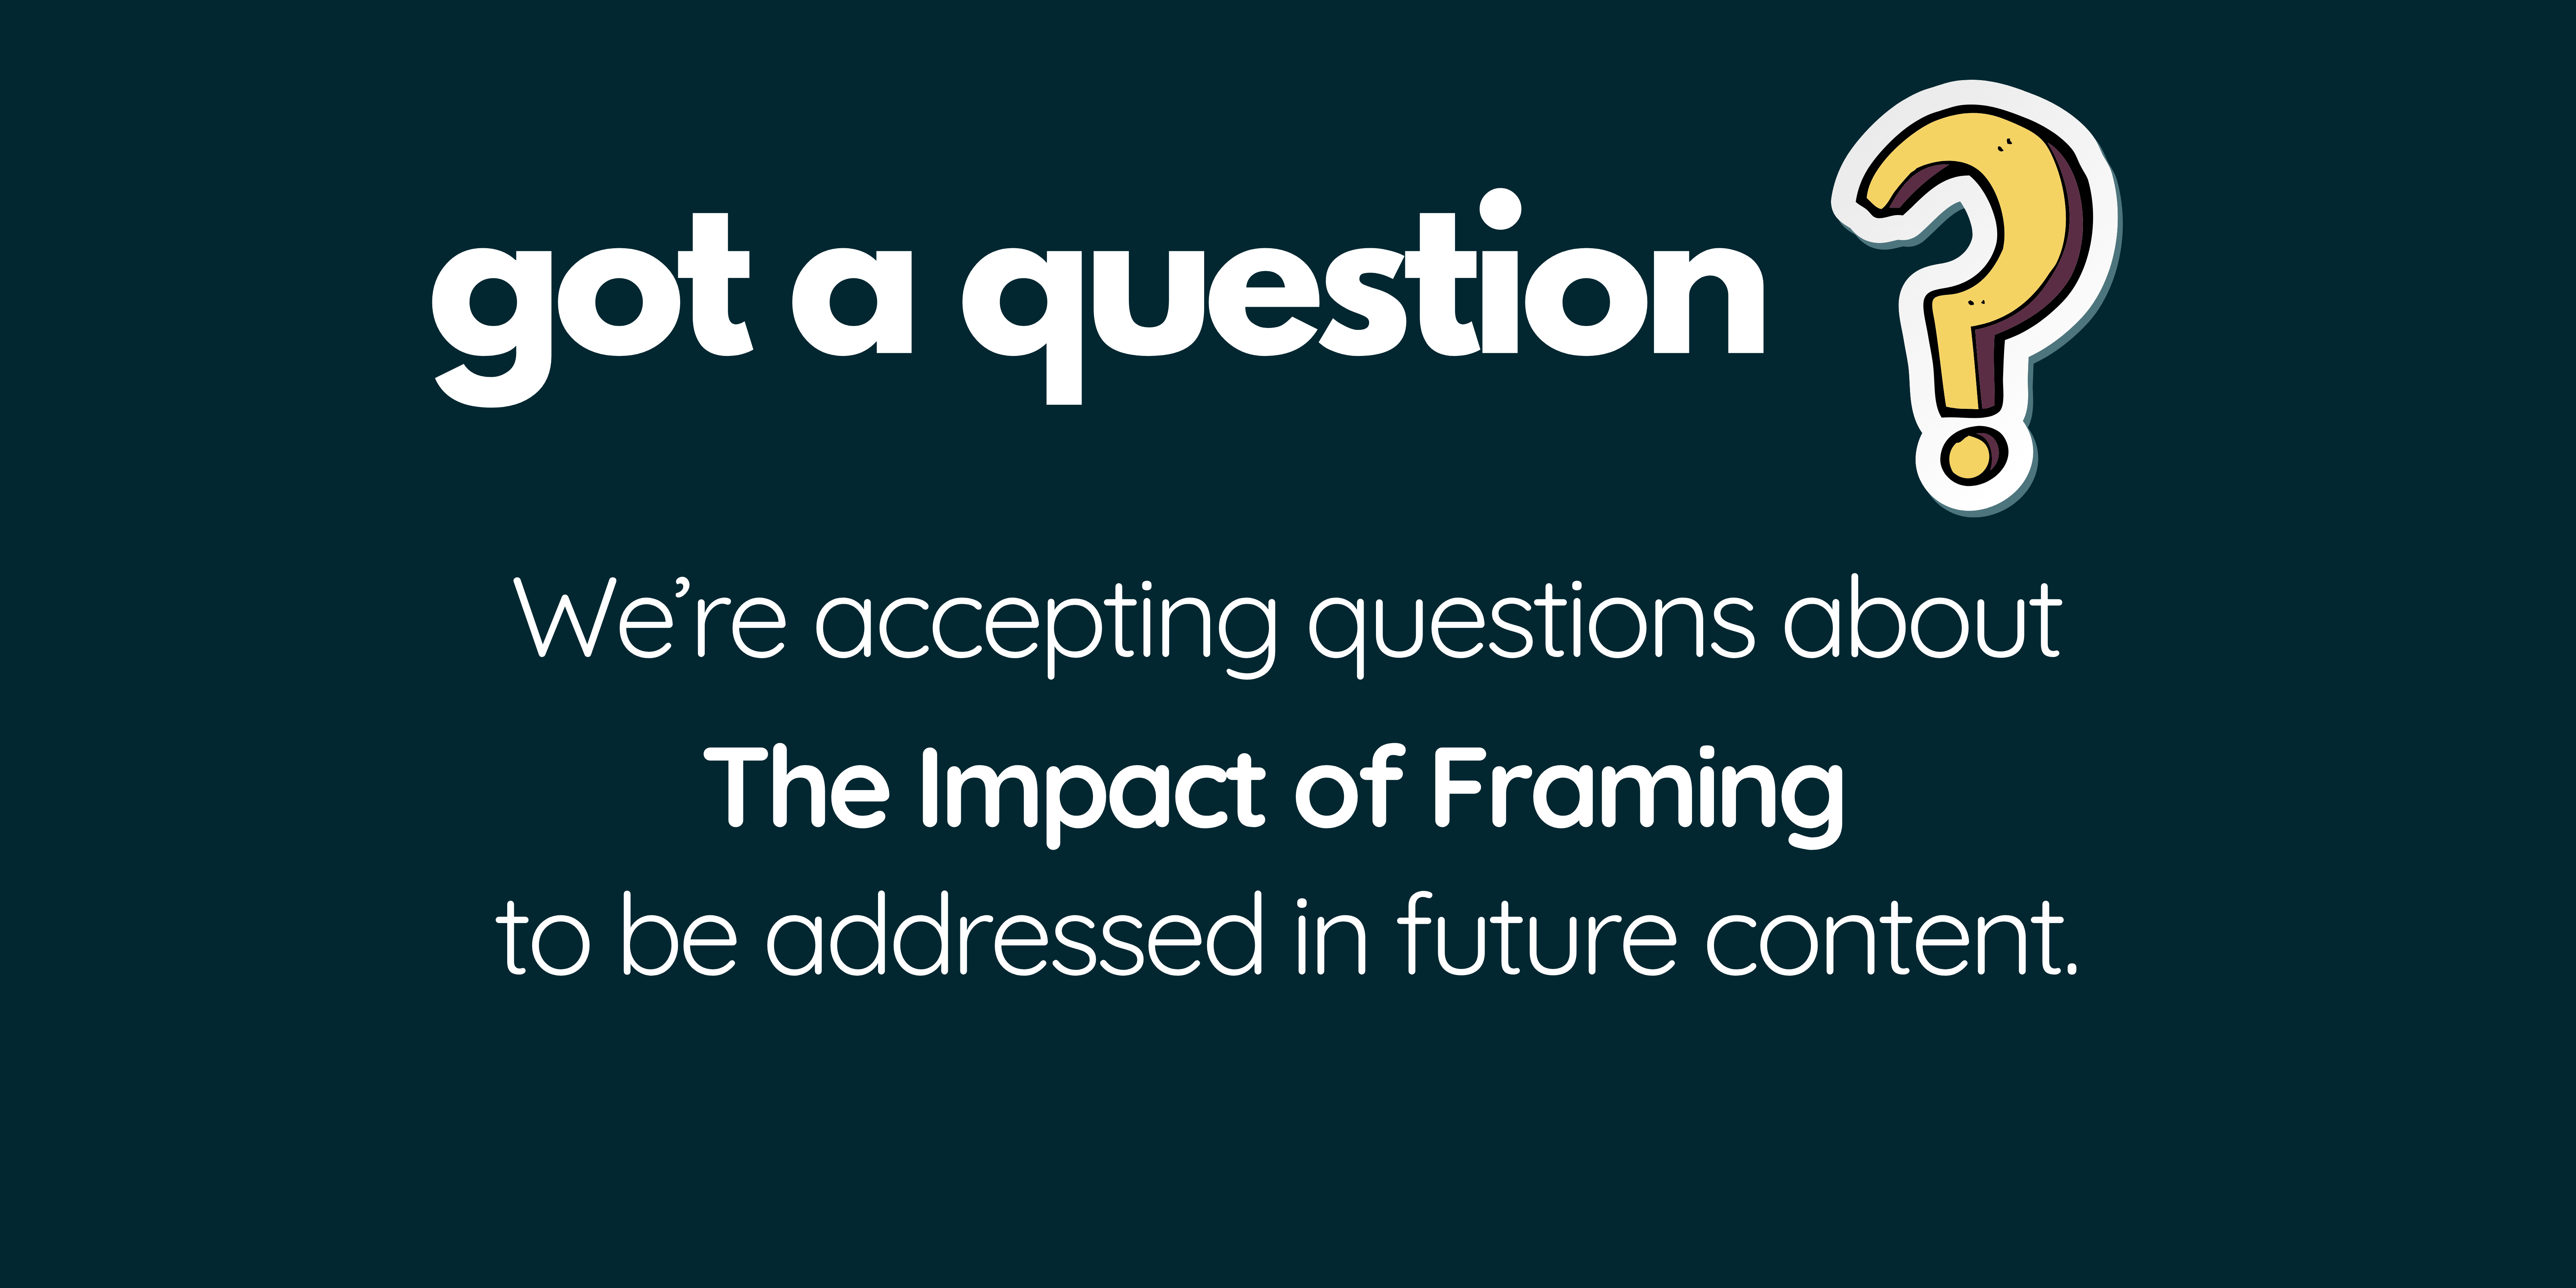 Got a question? We're accepting questions about The Impact of Framing to be addressed in future content.